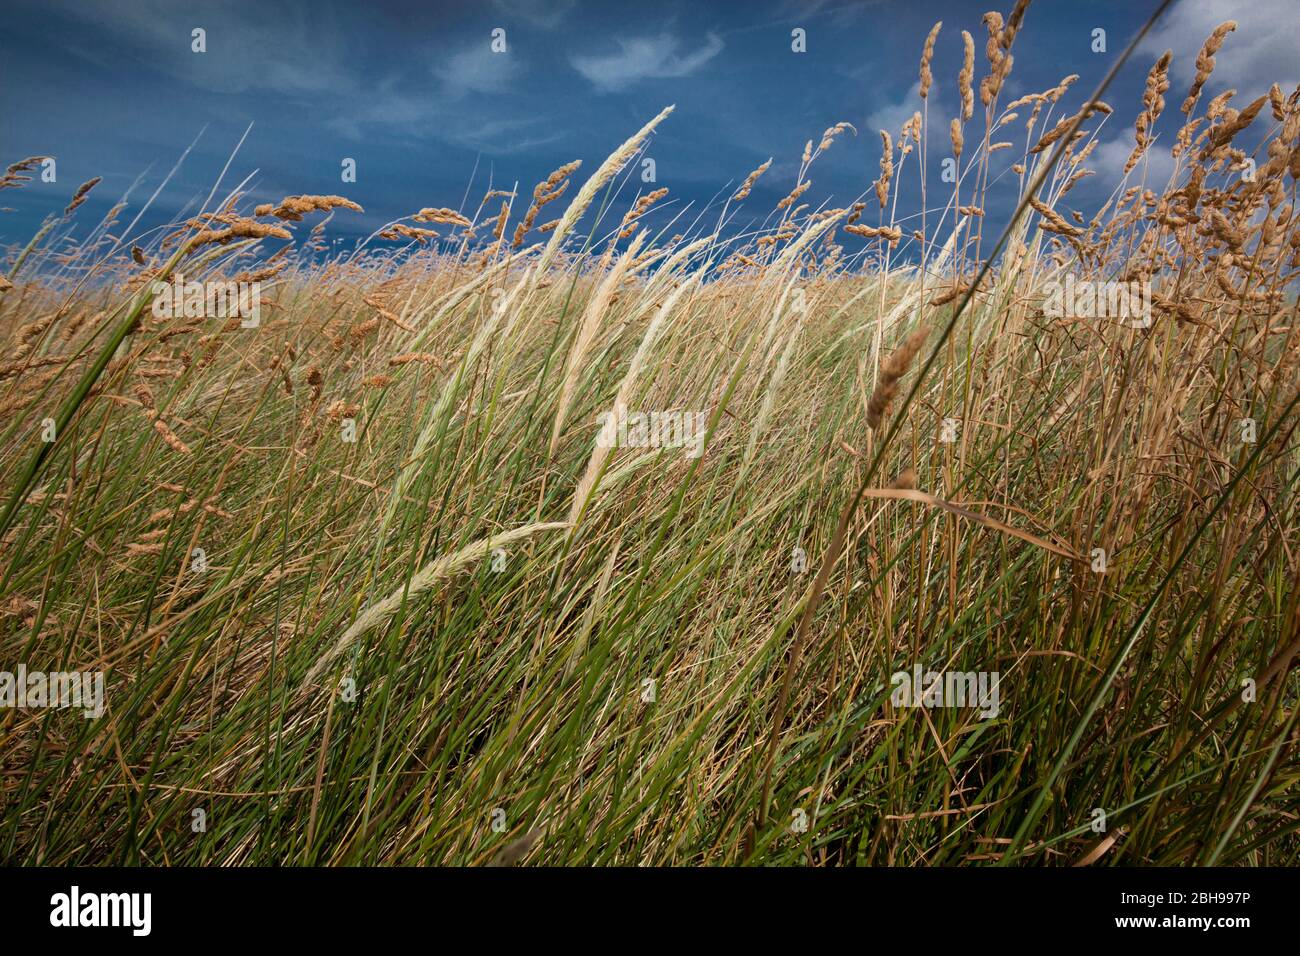 Tall grass blows in the wind Stock Photo